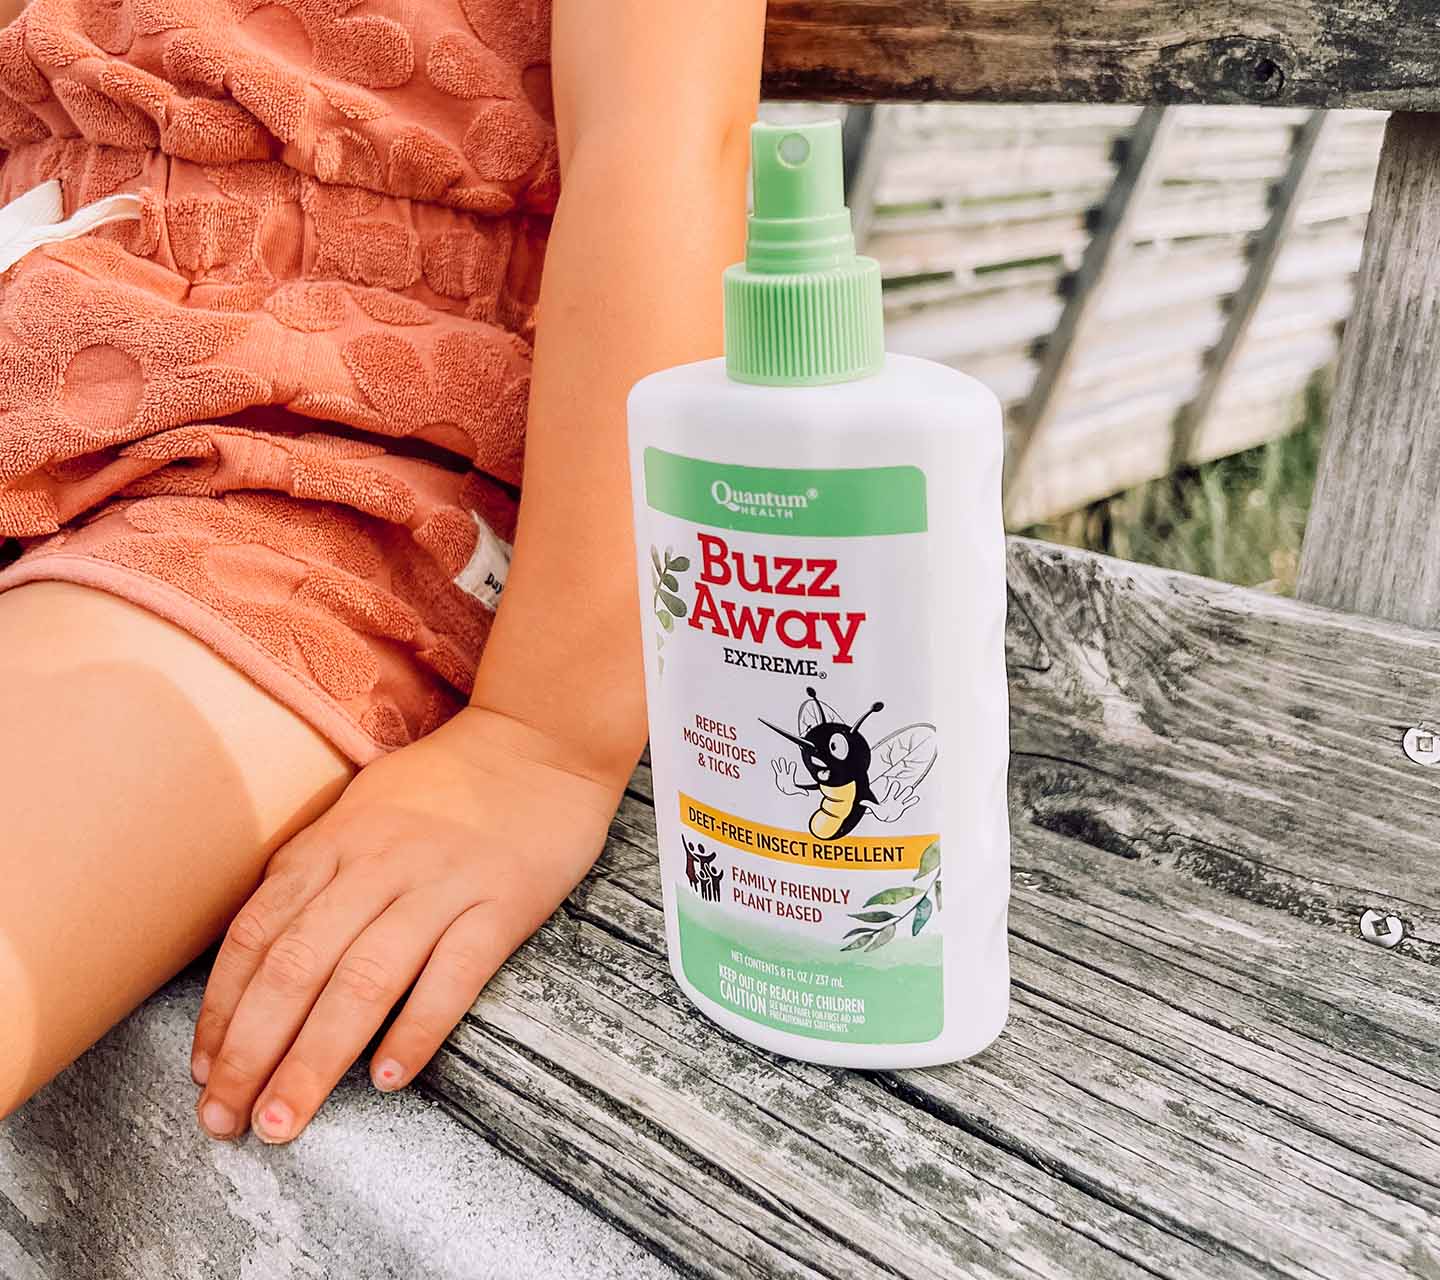 Quantum Health Buzz Away bug spray on an outdoor table beside a child